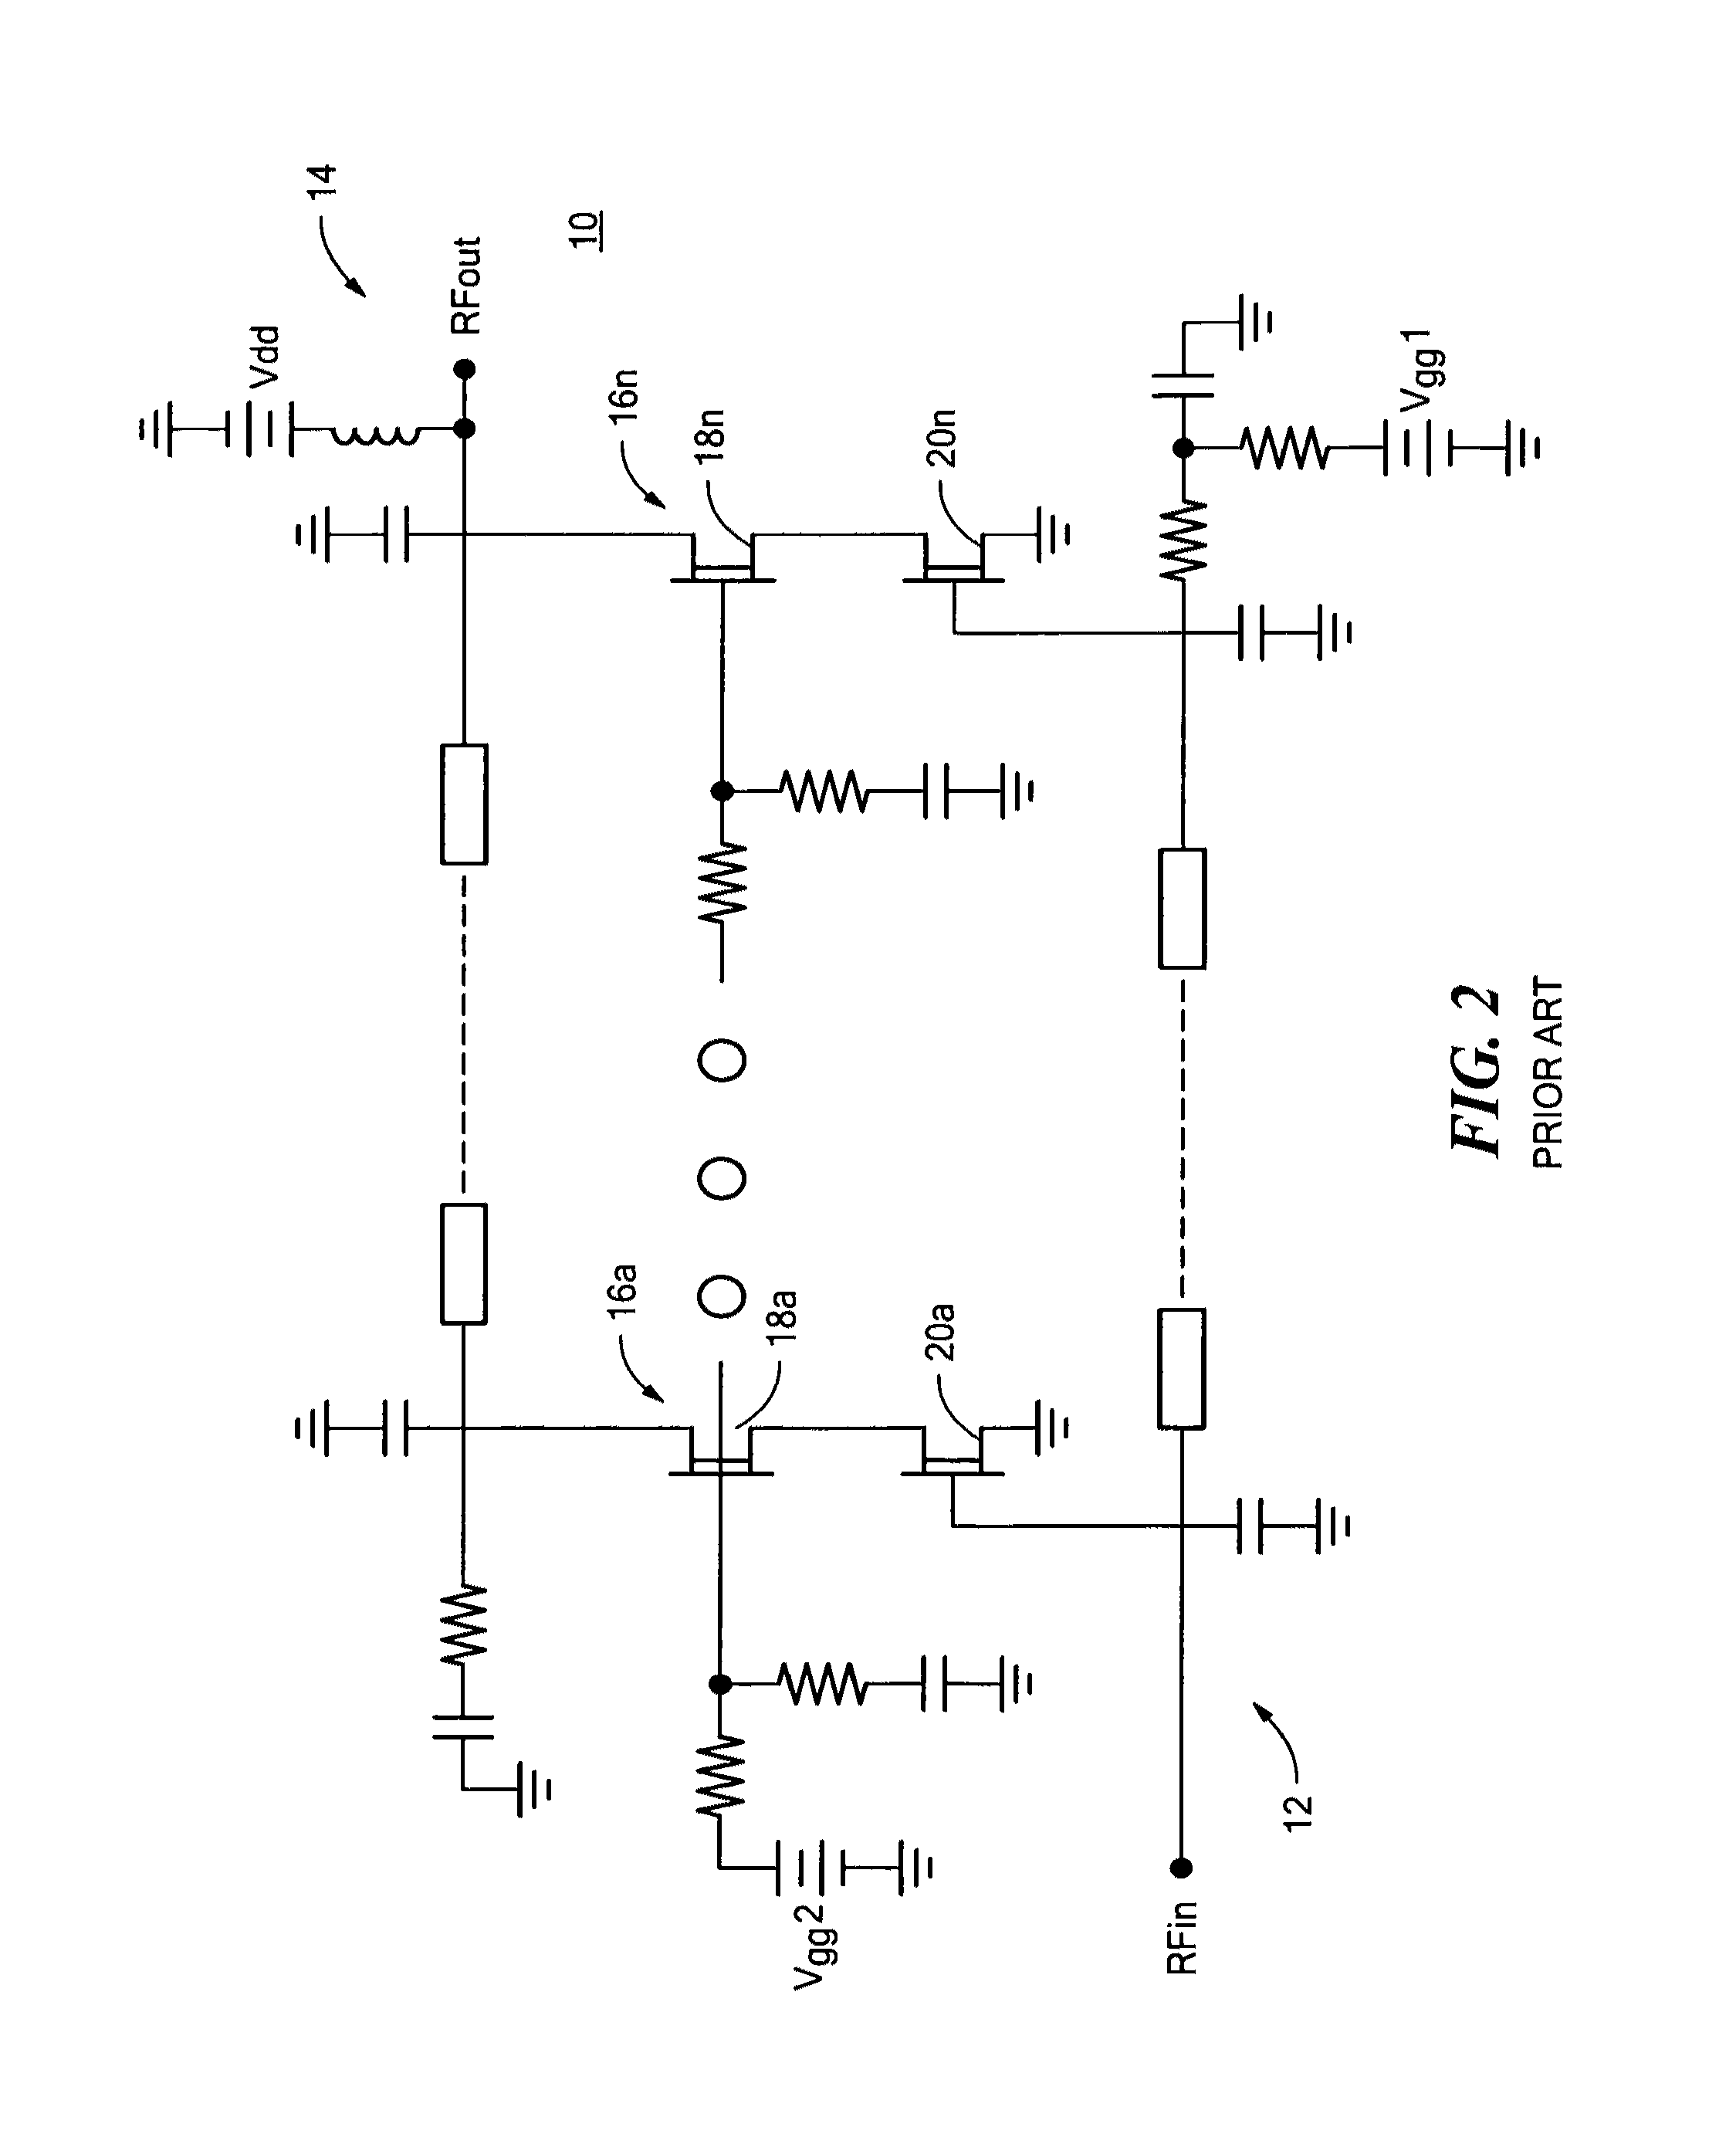 Distributed amplifier with improved stabilization